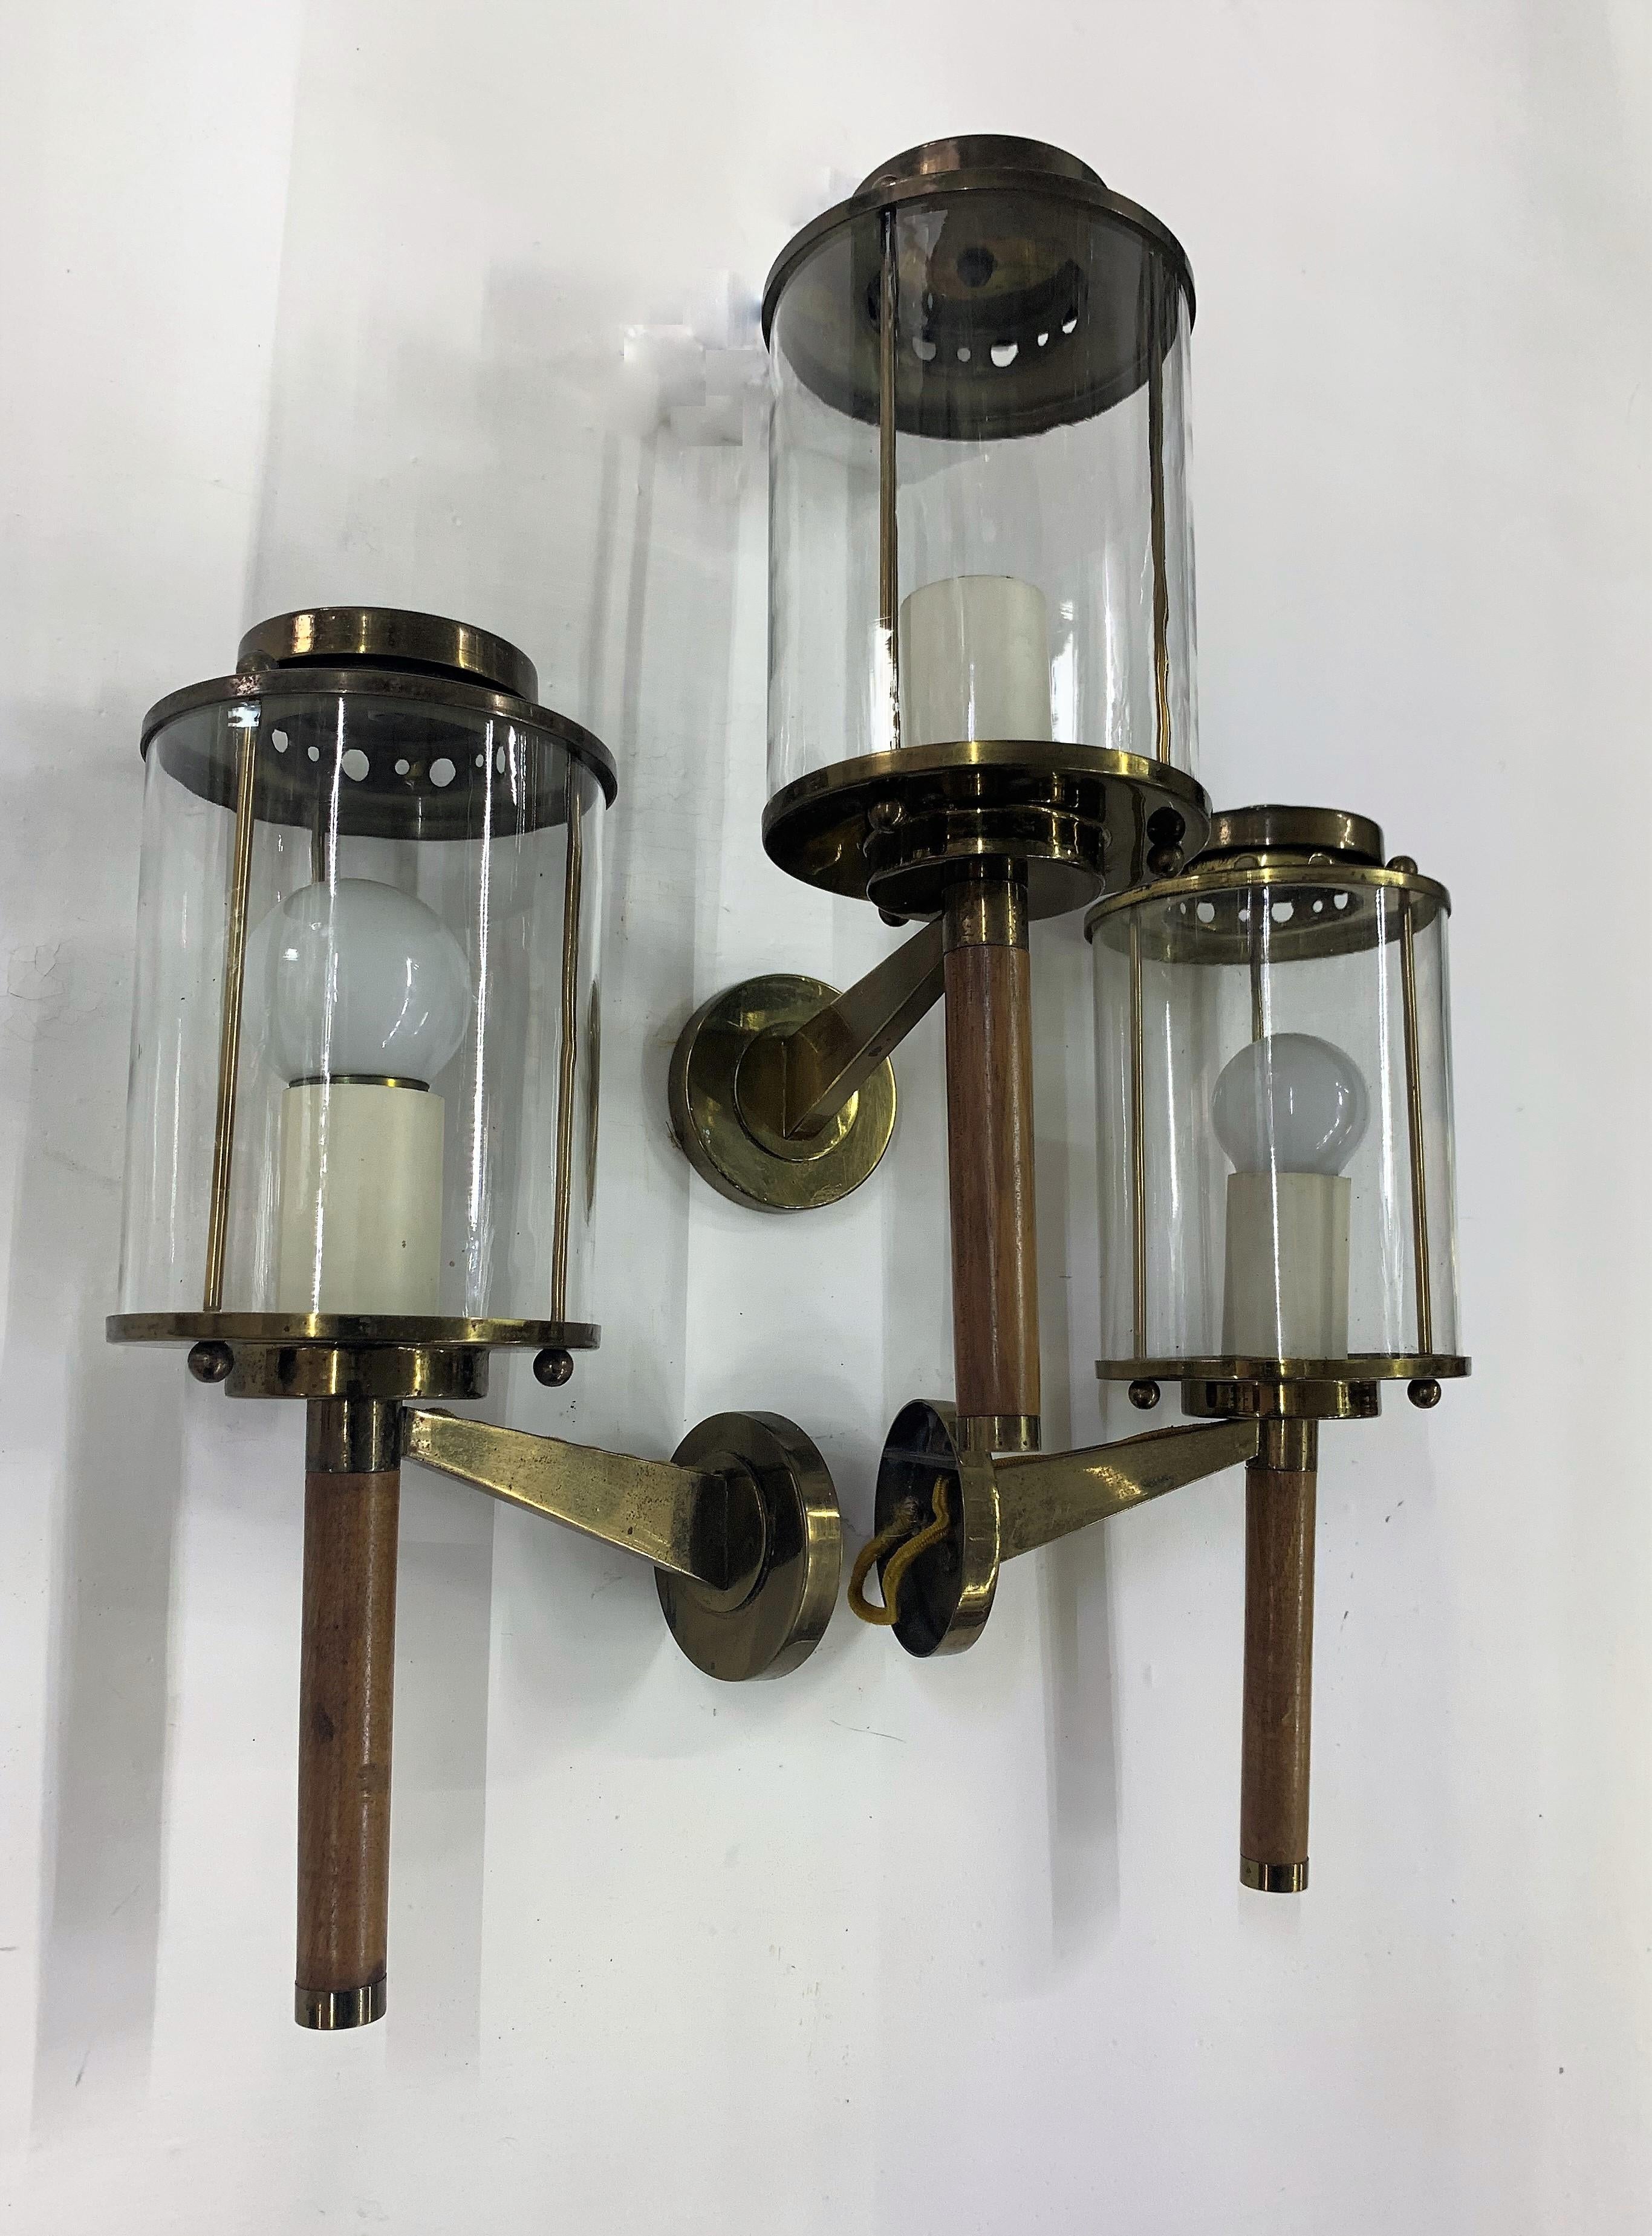 Pair of Mid-Century Modern sconces or wall lights attributed to Maison Arlus in brass, wood (teak?) and clear glass.
Made in France, circa 1950s.
The sconces still had the original fabric electric cable (last photographs) but they have been